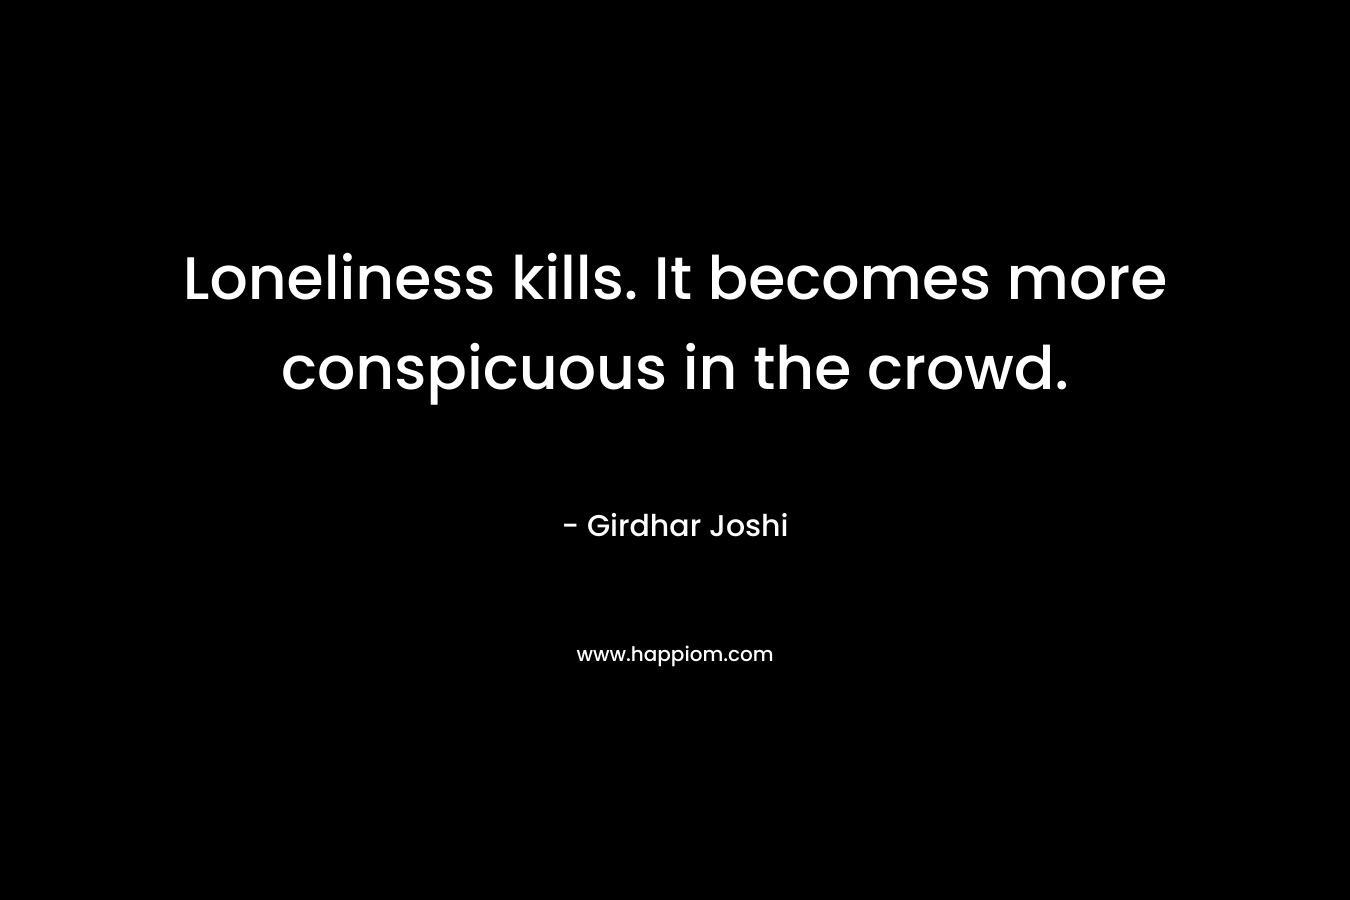 Loneliness kills. It becomes more conspicuous in the crowd.